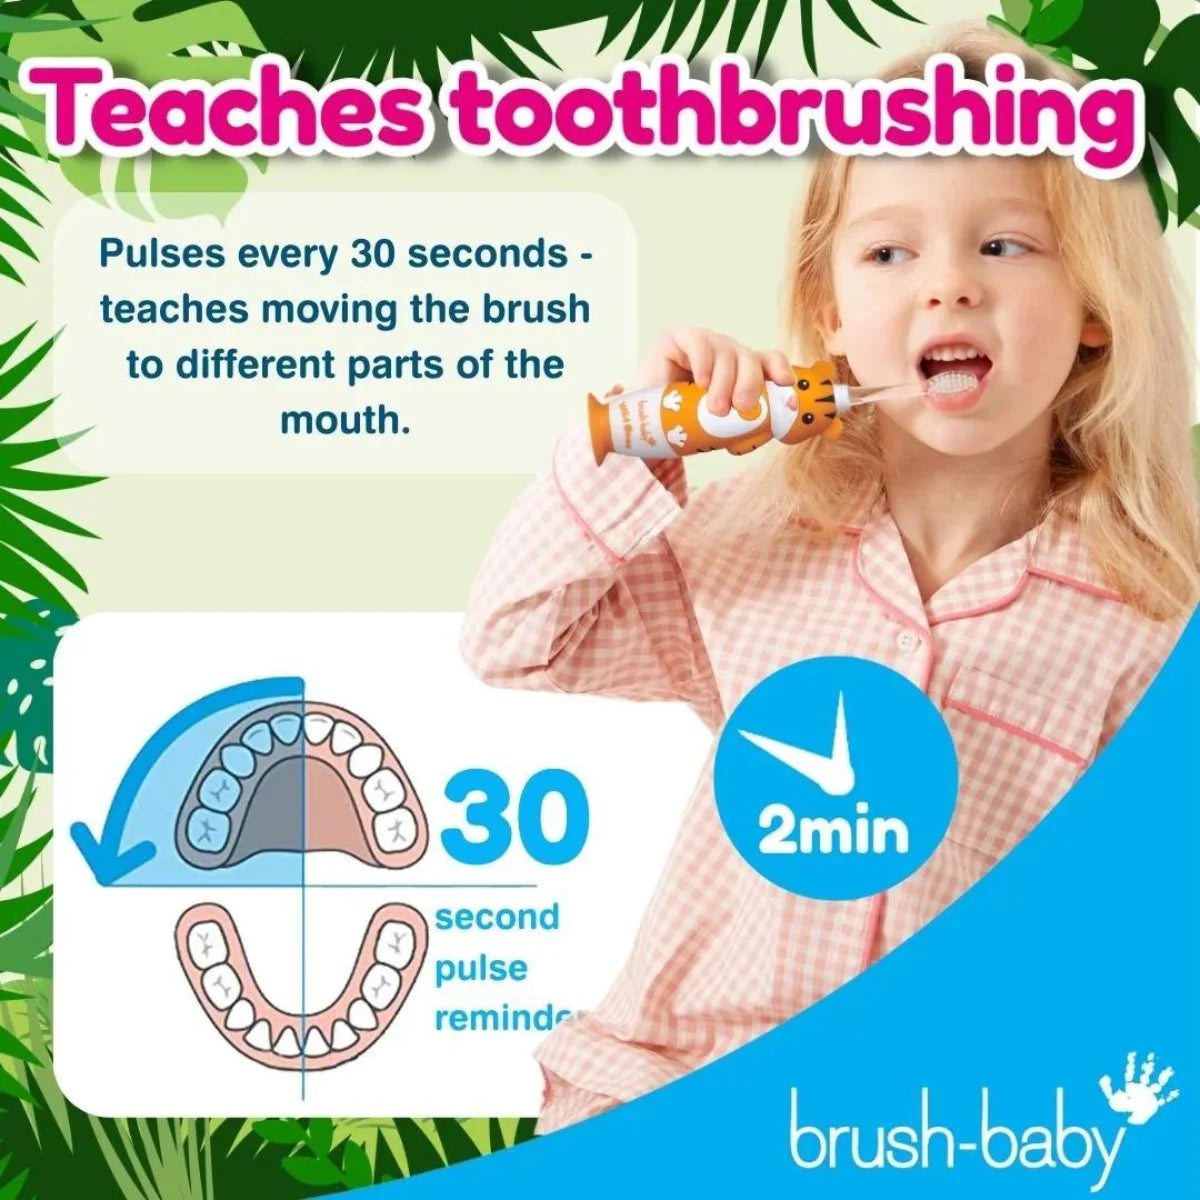 BrushBaby WildOnes Tiger Kids Sonic Rechargeable Toothbrush for children